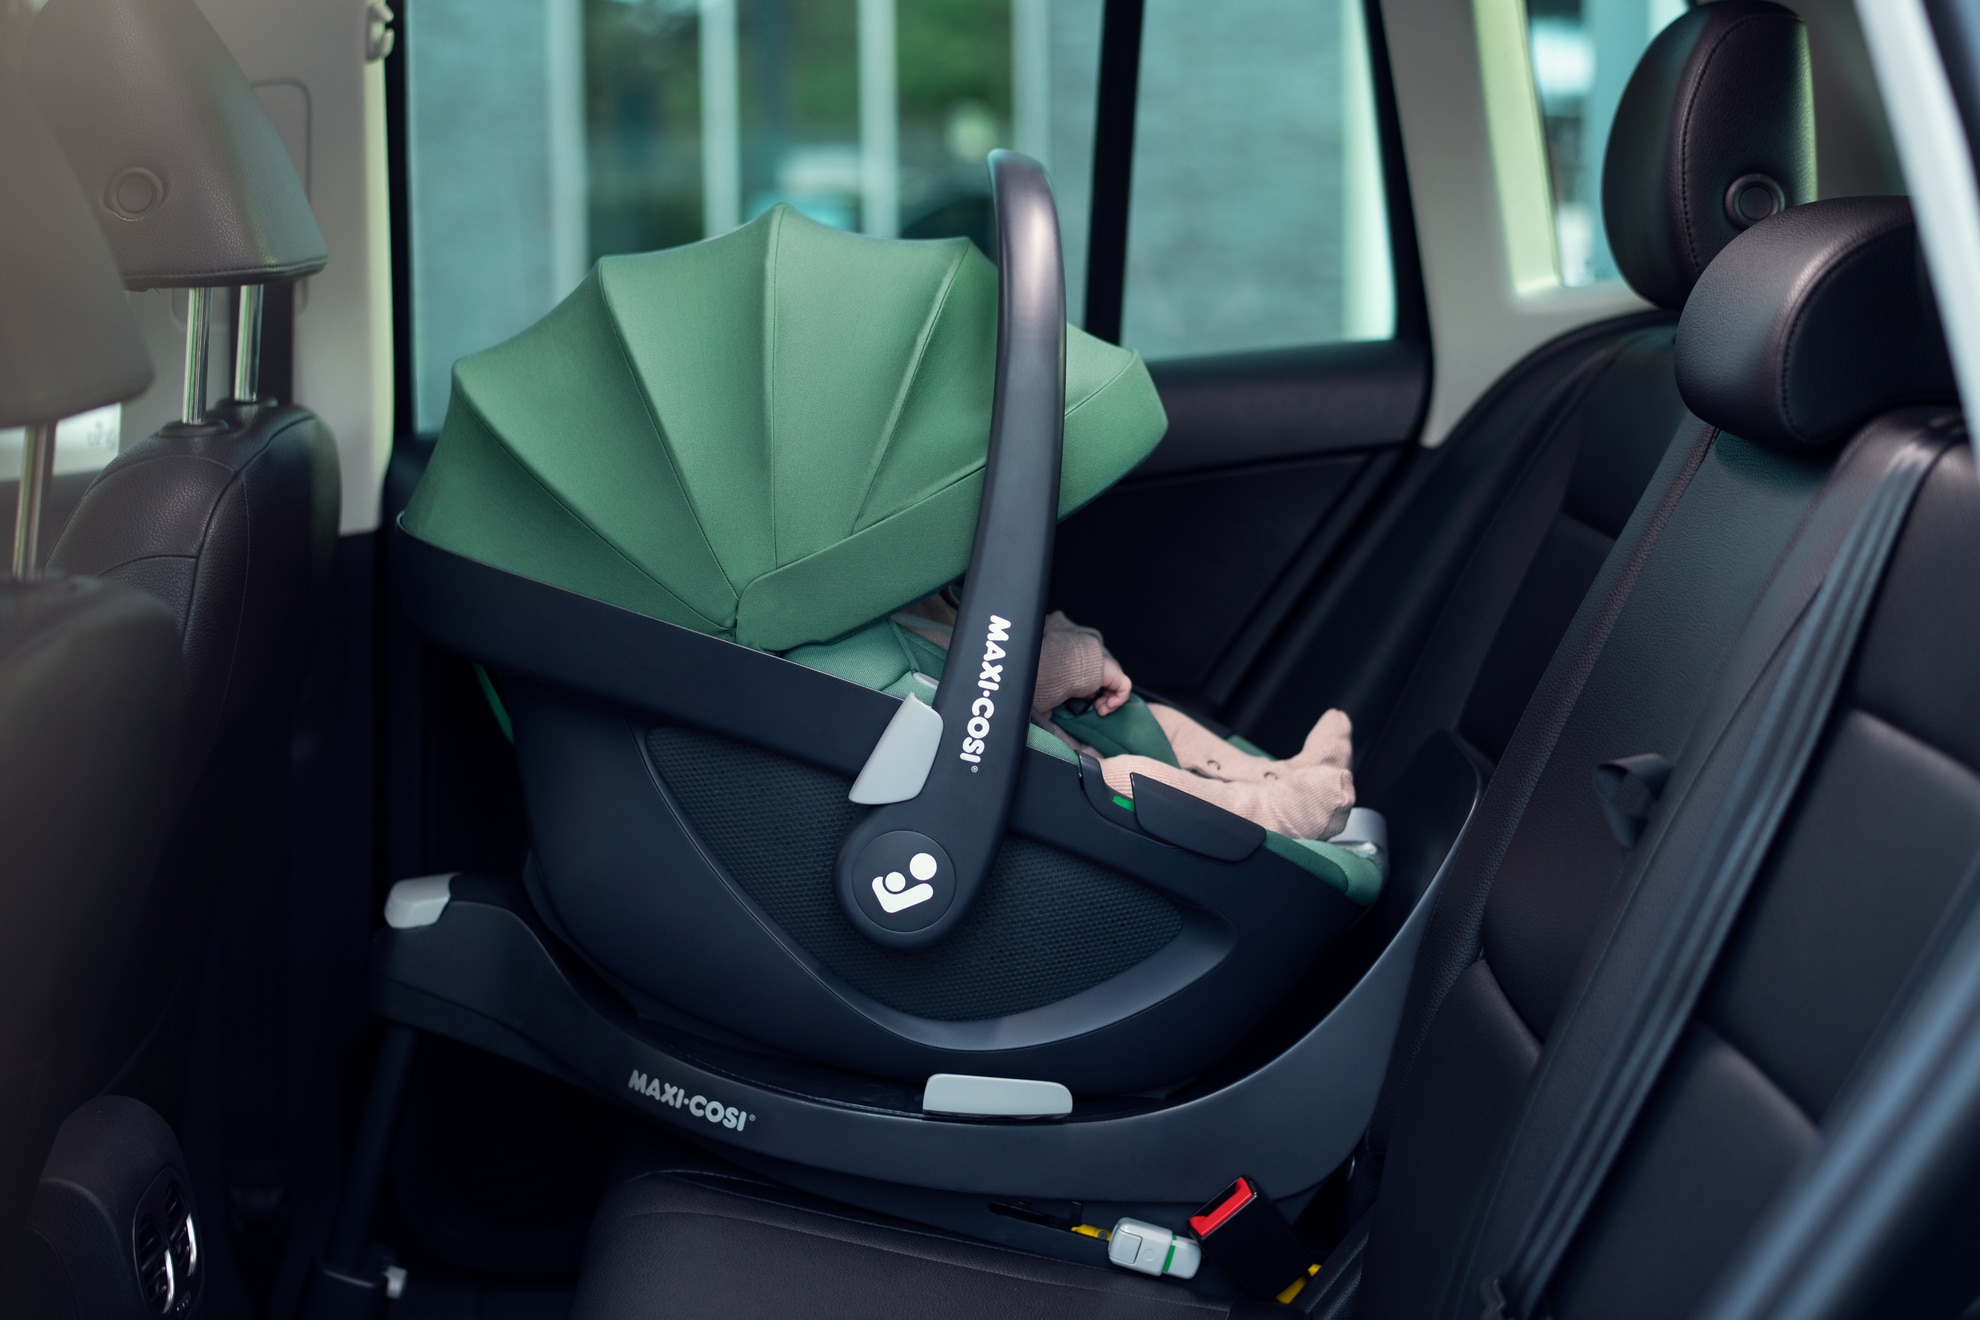 How Do I Clean My Child's Car Seat? - Car Seats For The Littles